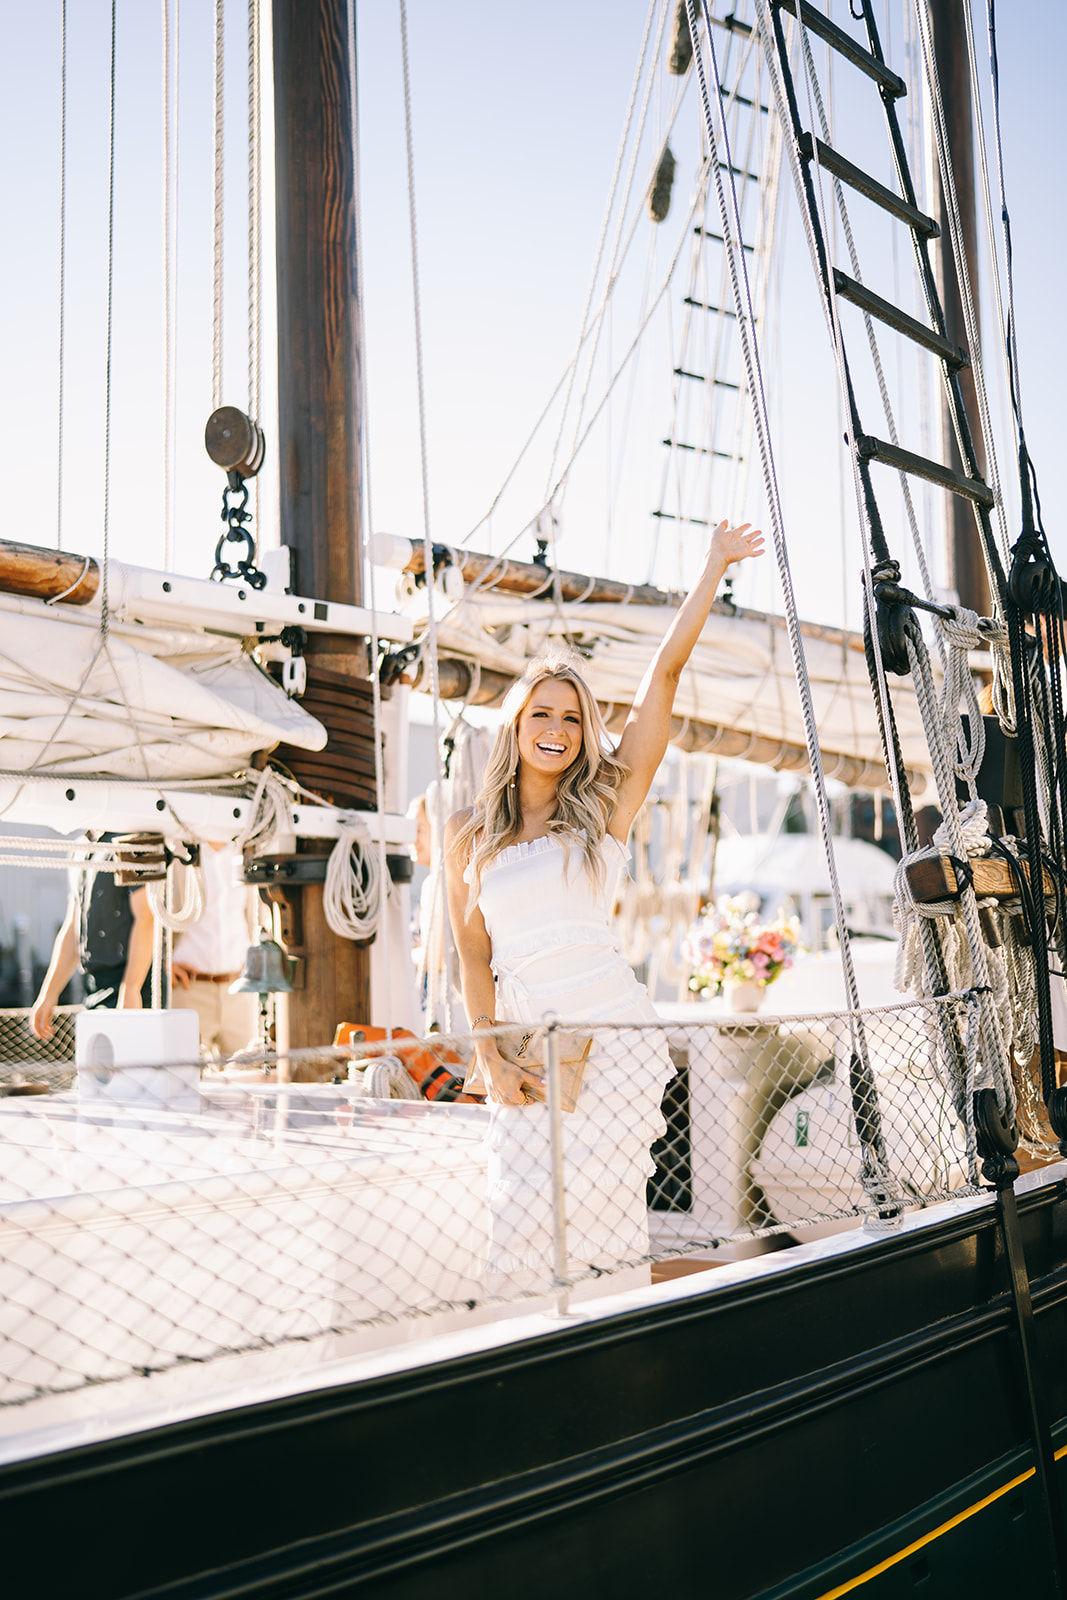 Woman standing on side of sailboat in white dress with her hand up in celebration